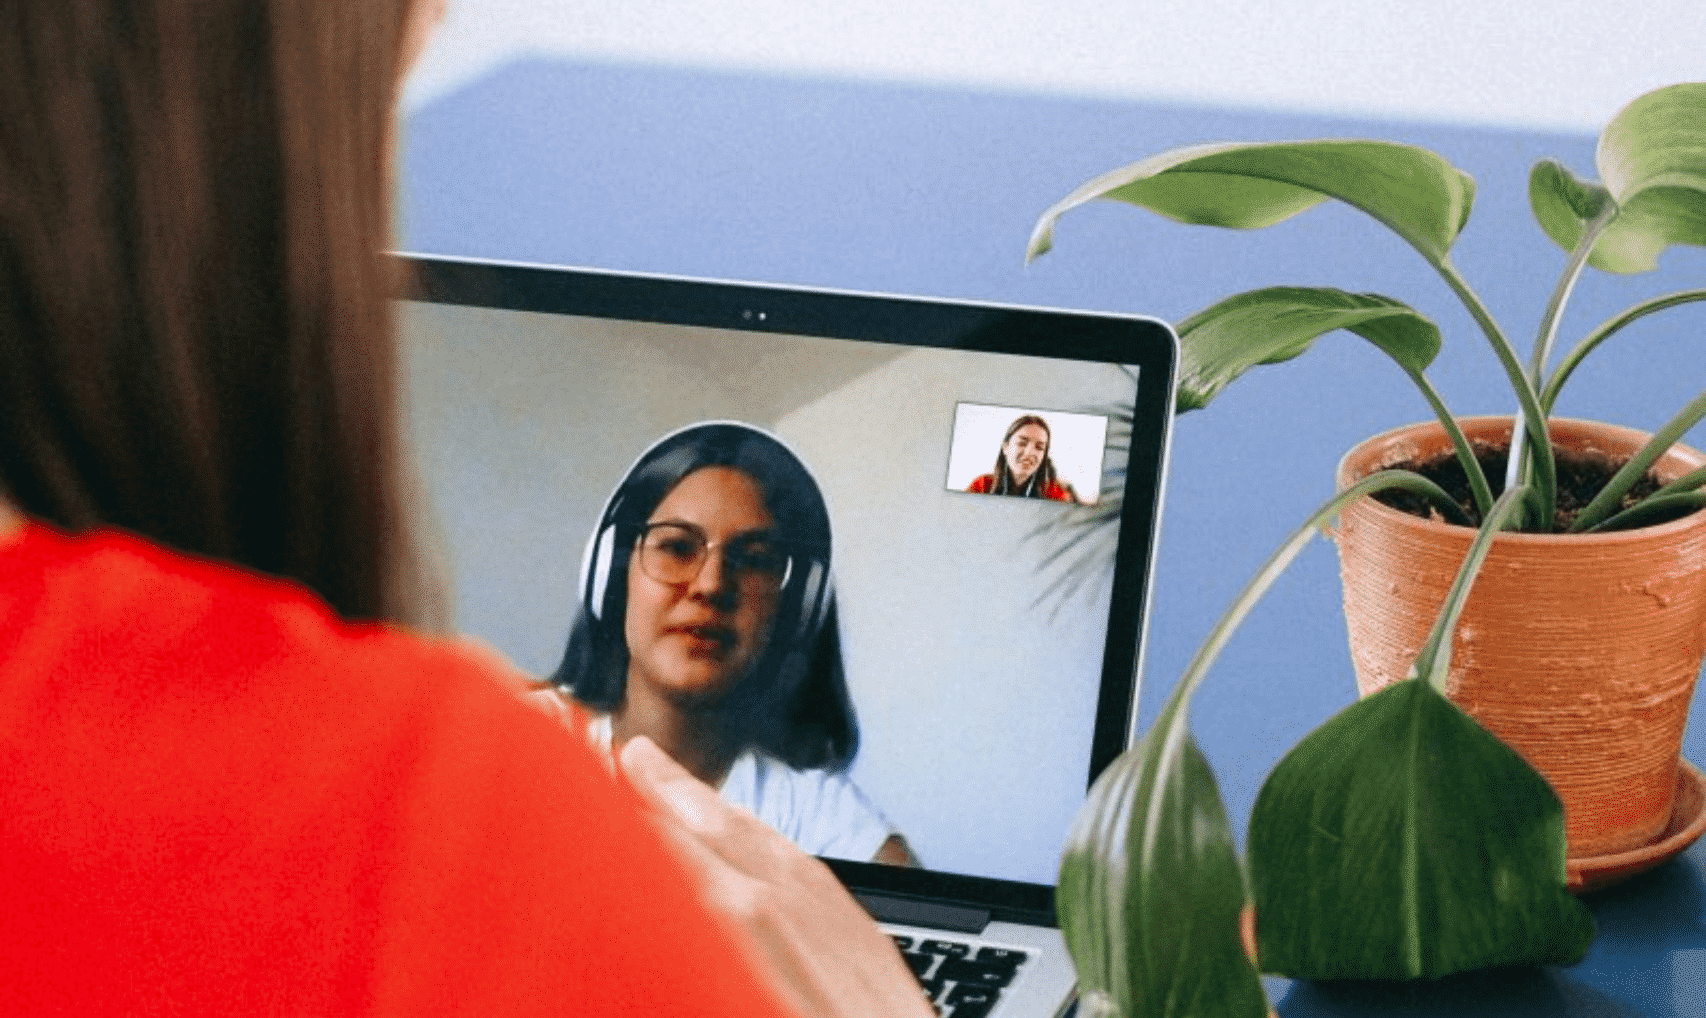 Two women video conferencing